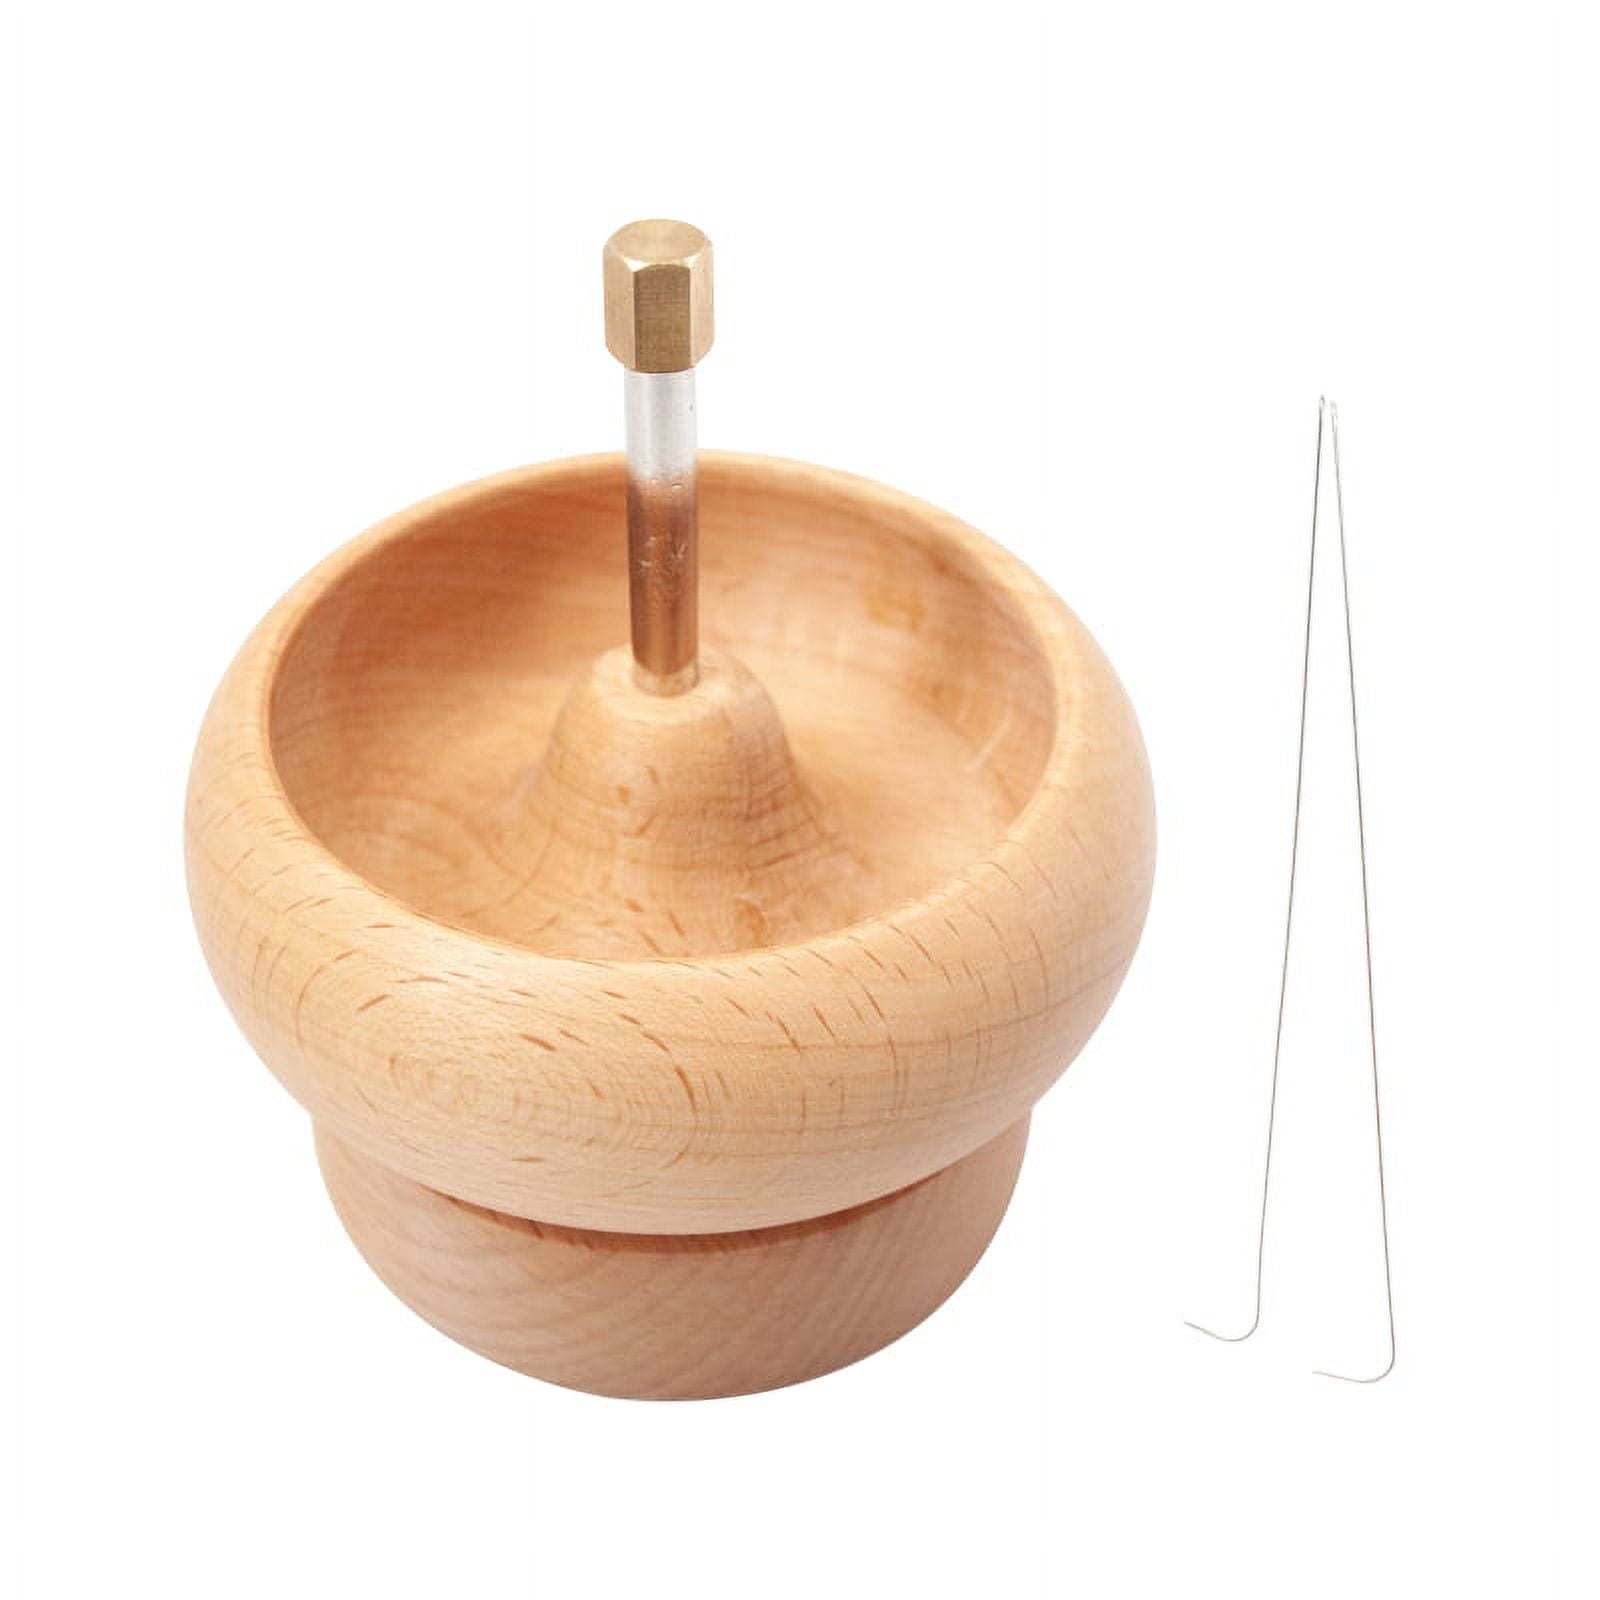 Bead Spinner Set with 2 Needles Labor Saving Bowl Bead Spinner Easy to Operate Reusable Wooden Bead Spinner Spin Beading Bowl with Beading Thread